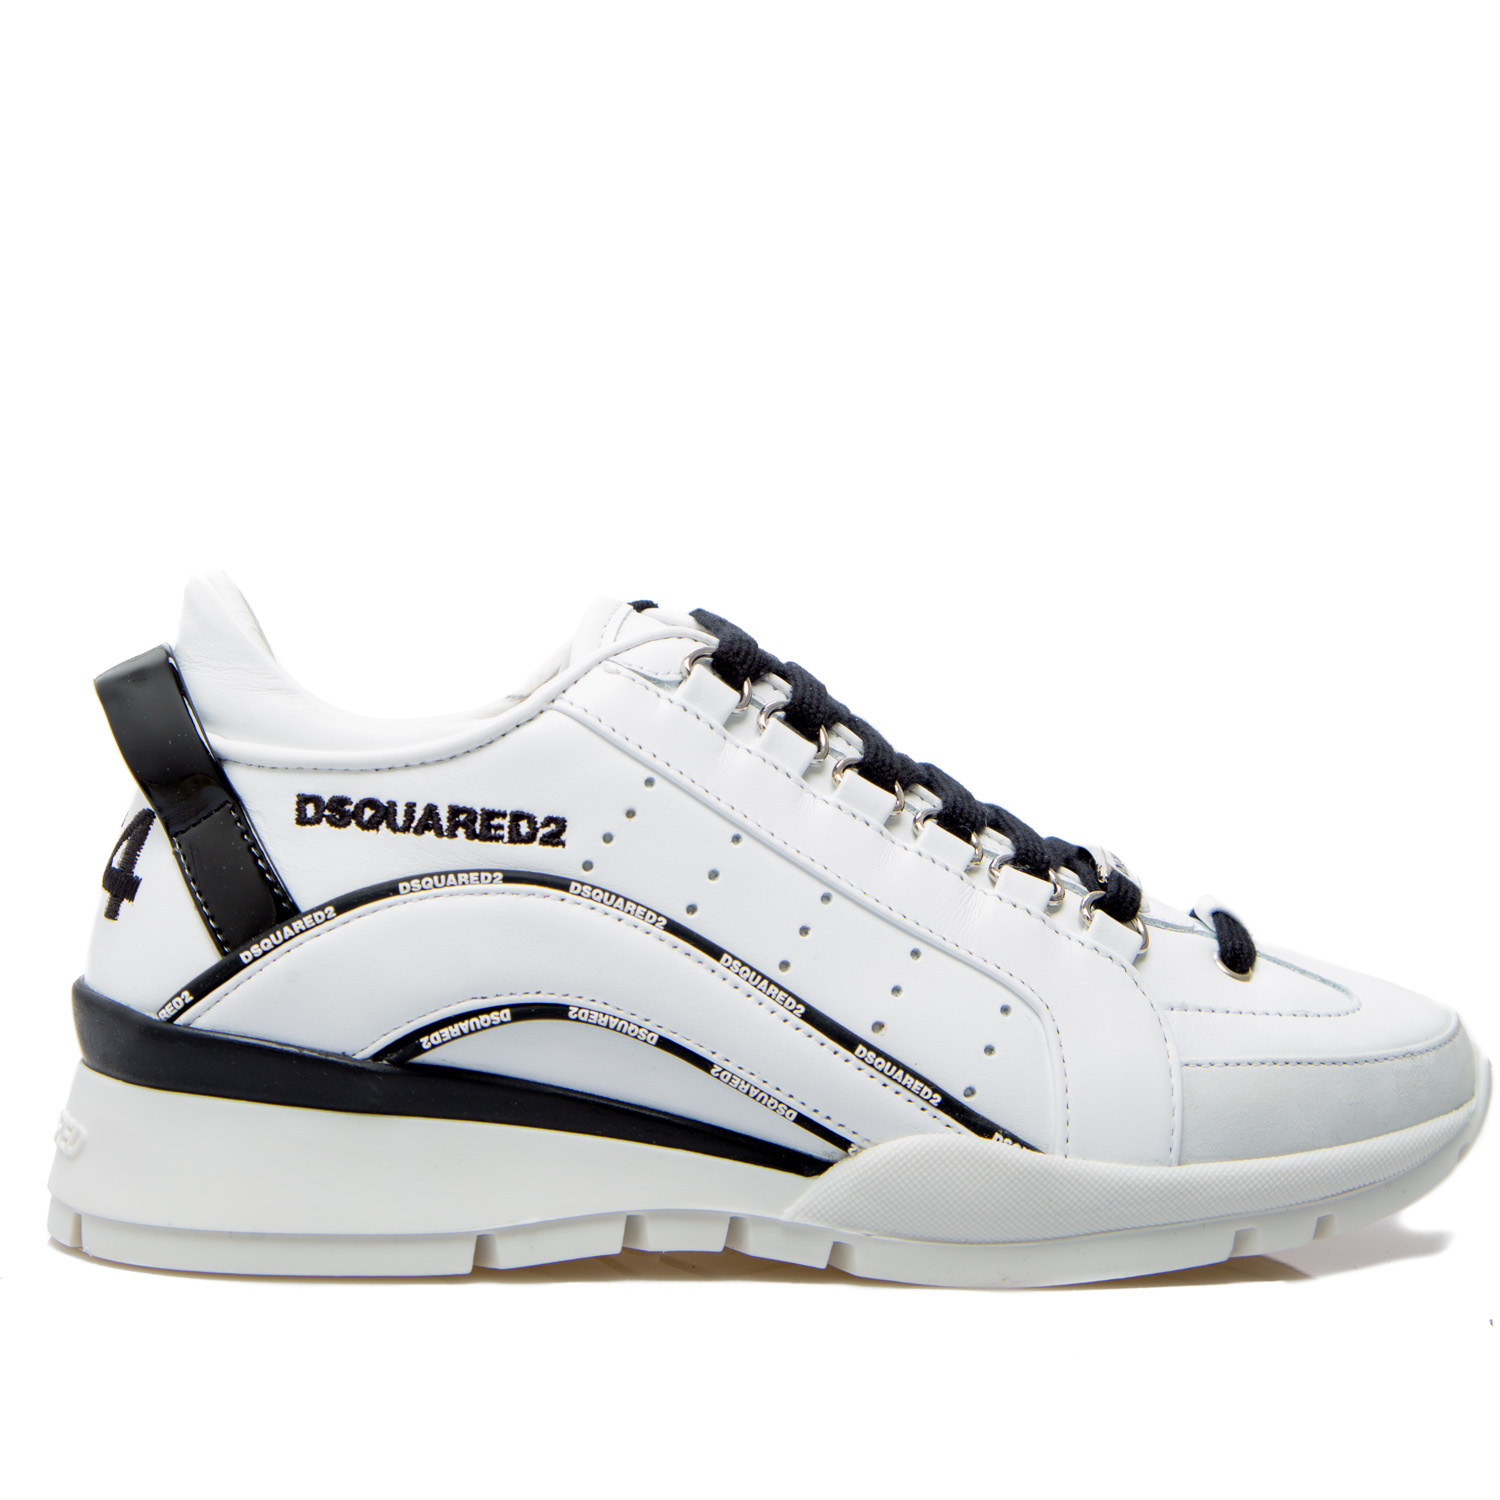 dsquared2 shoes greece